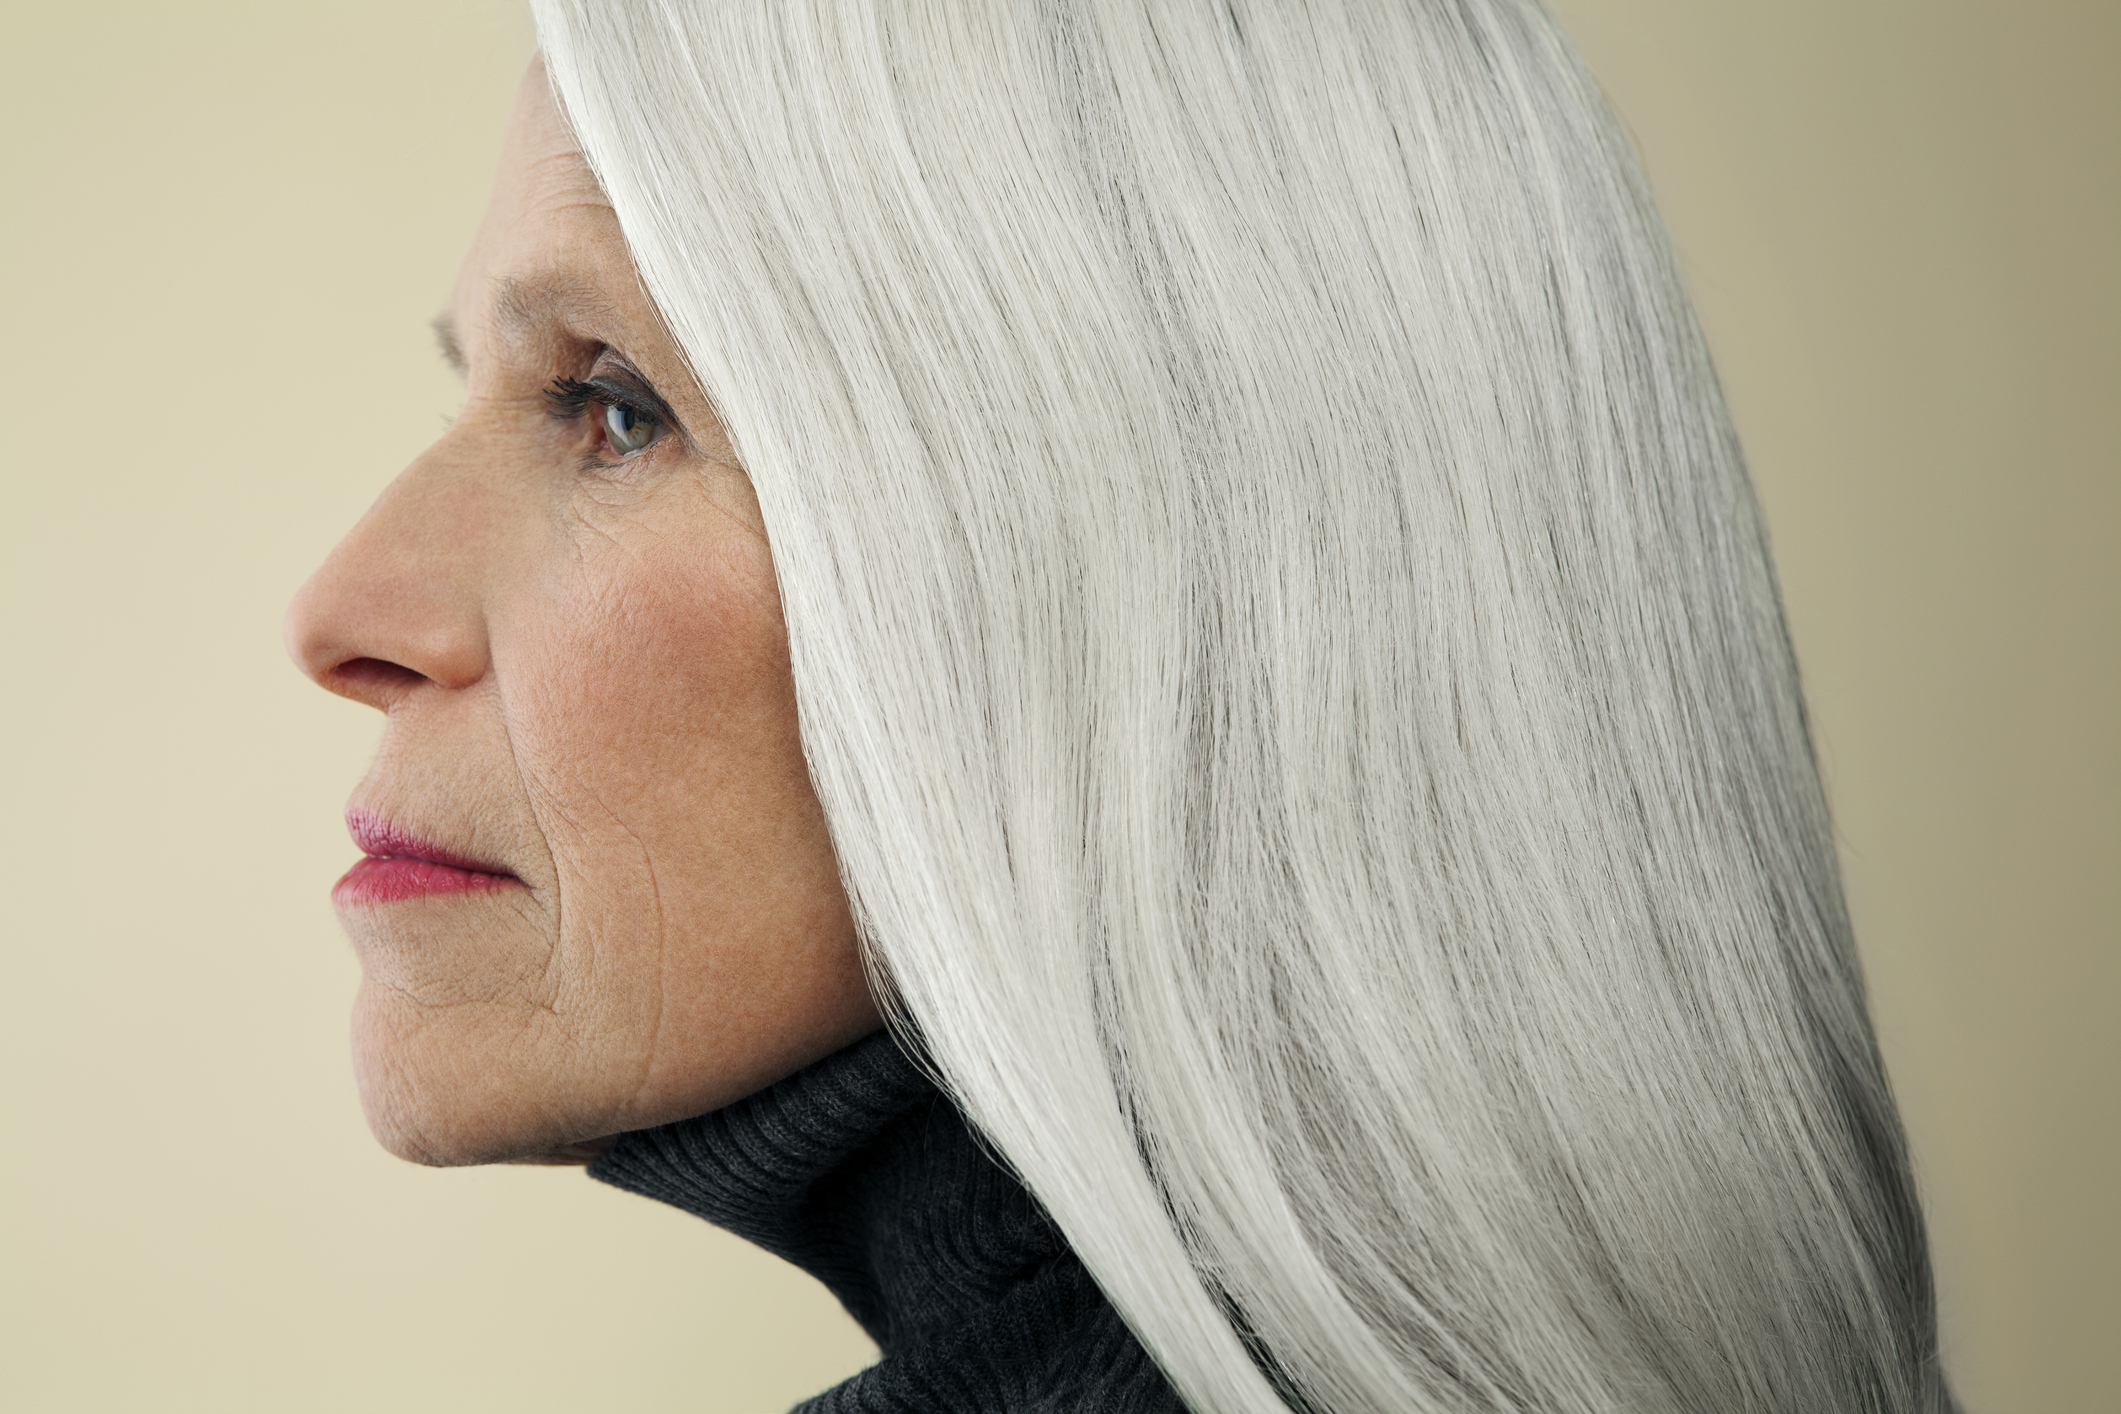 Side profile of an older woman with long, straight gray hair, wearing a turtleneck